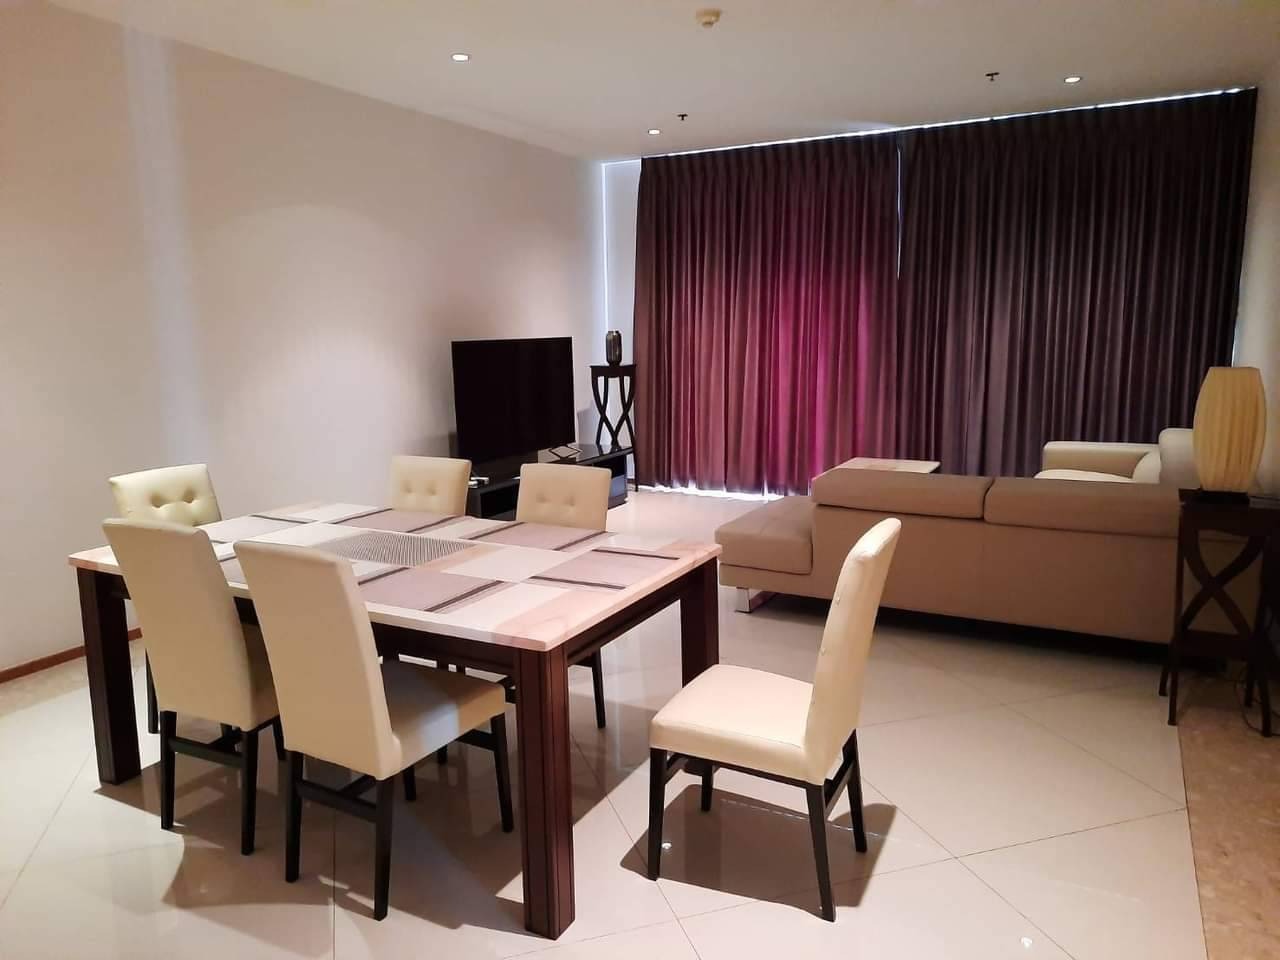 2 Bedrooms, 2 Bathrooms 114sqm size at The Empire Place Sathorn For Rent 55K & Sale Price 19M